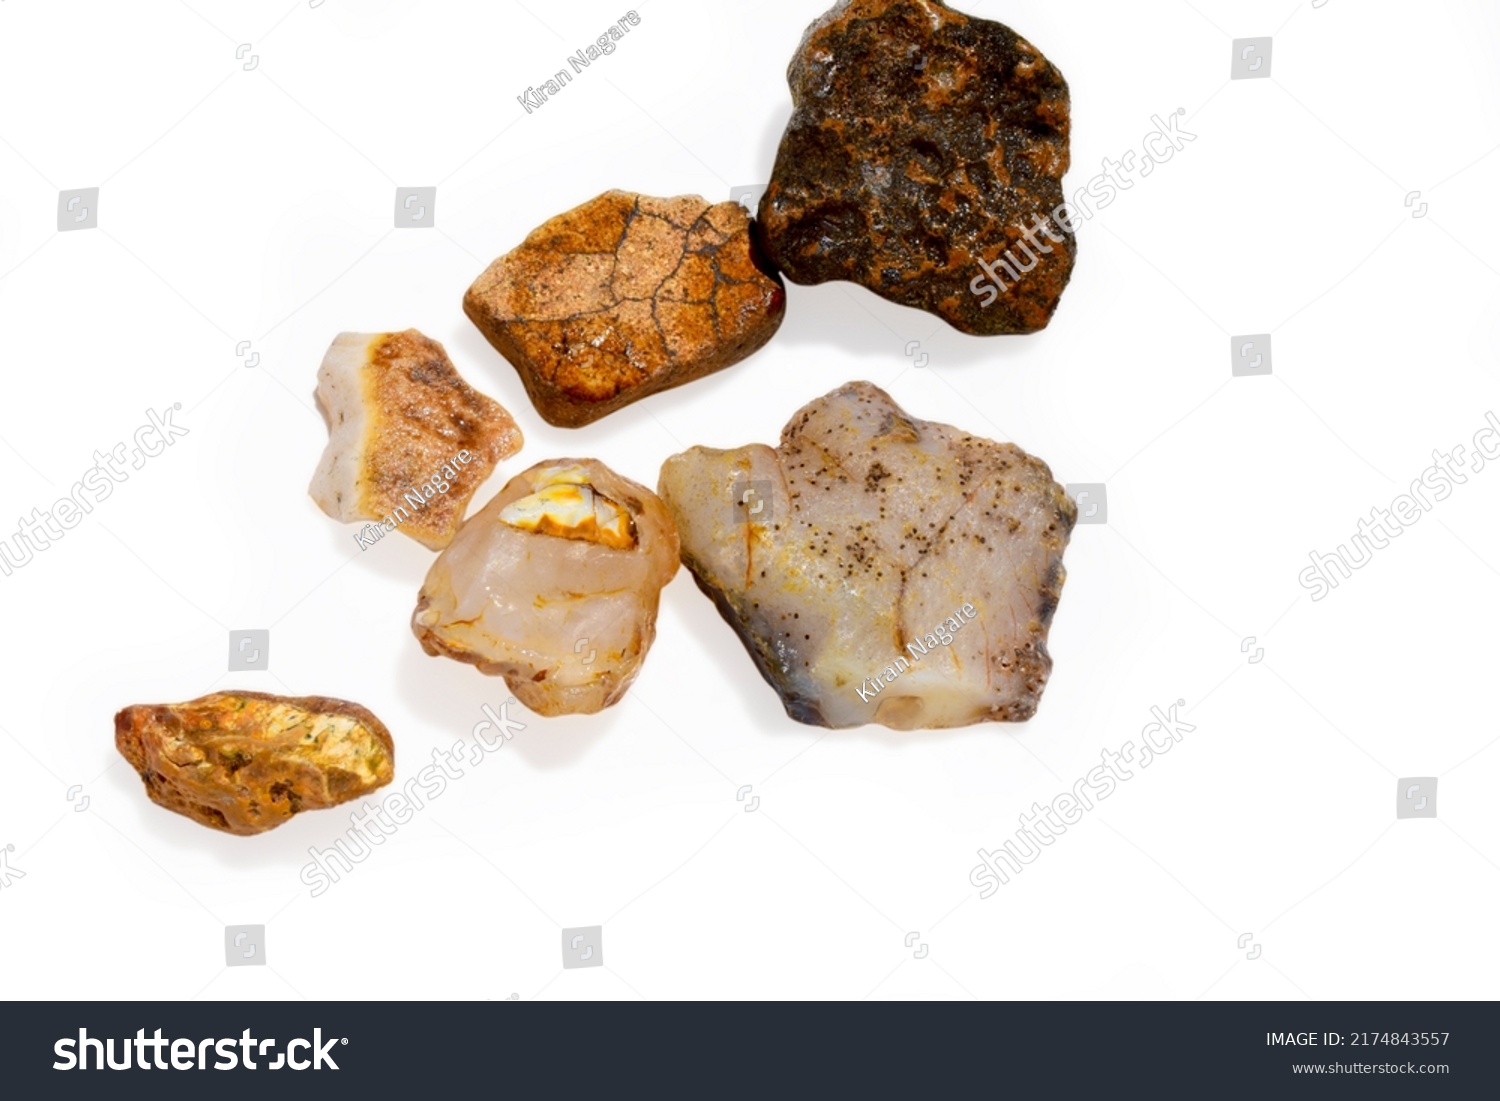 Colorful collection of small river stones on white background, River stones background. #2174843557